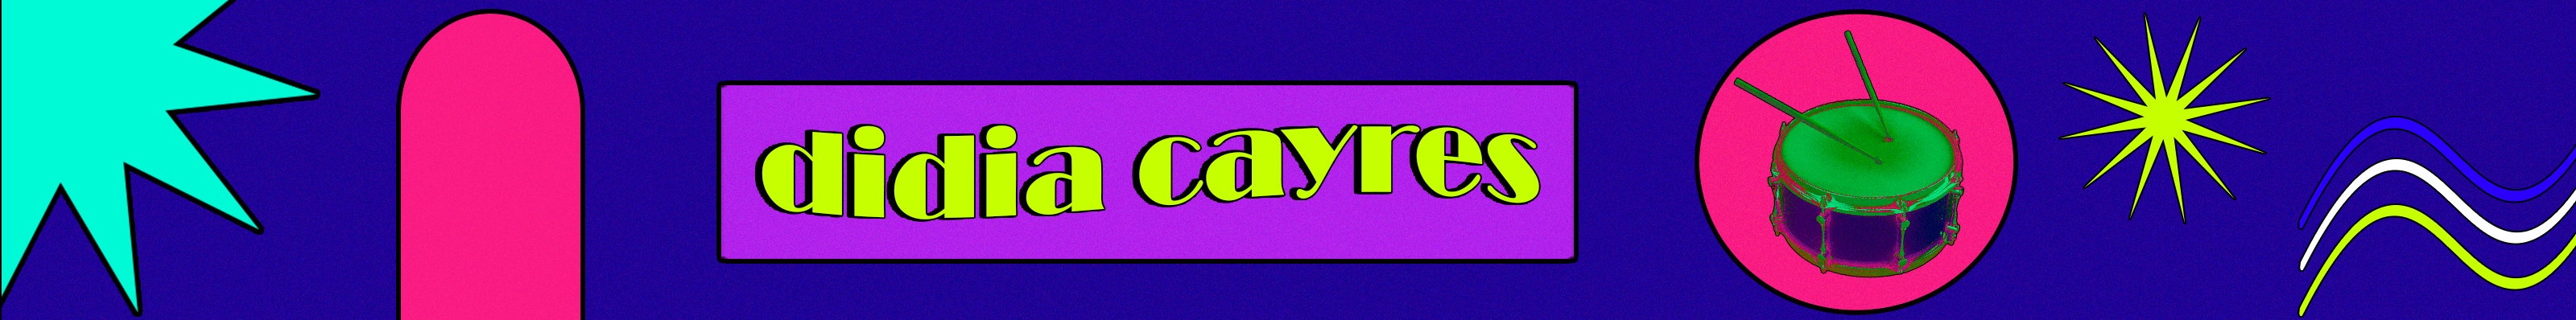 Didia Cayres's profile banner